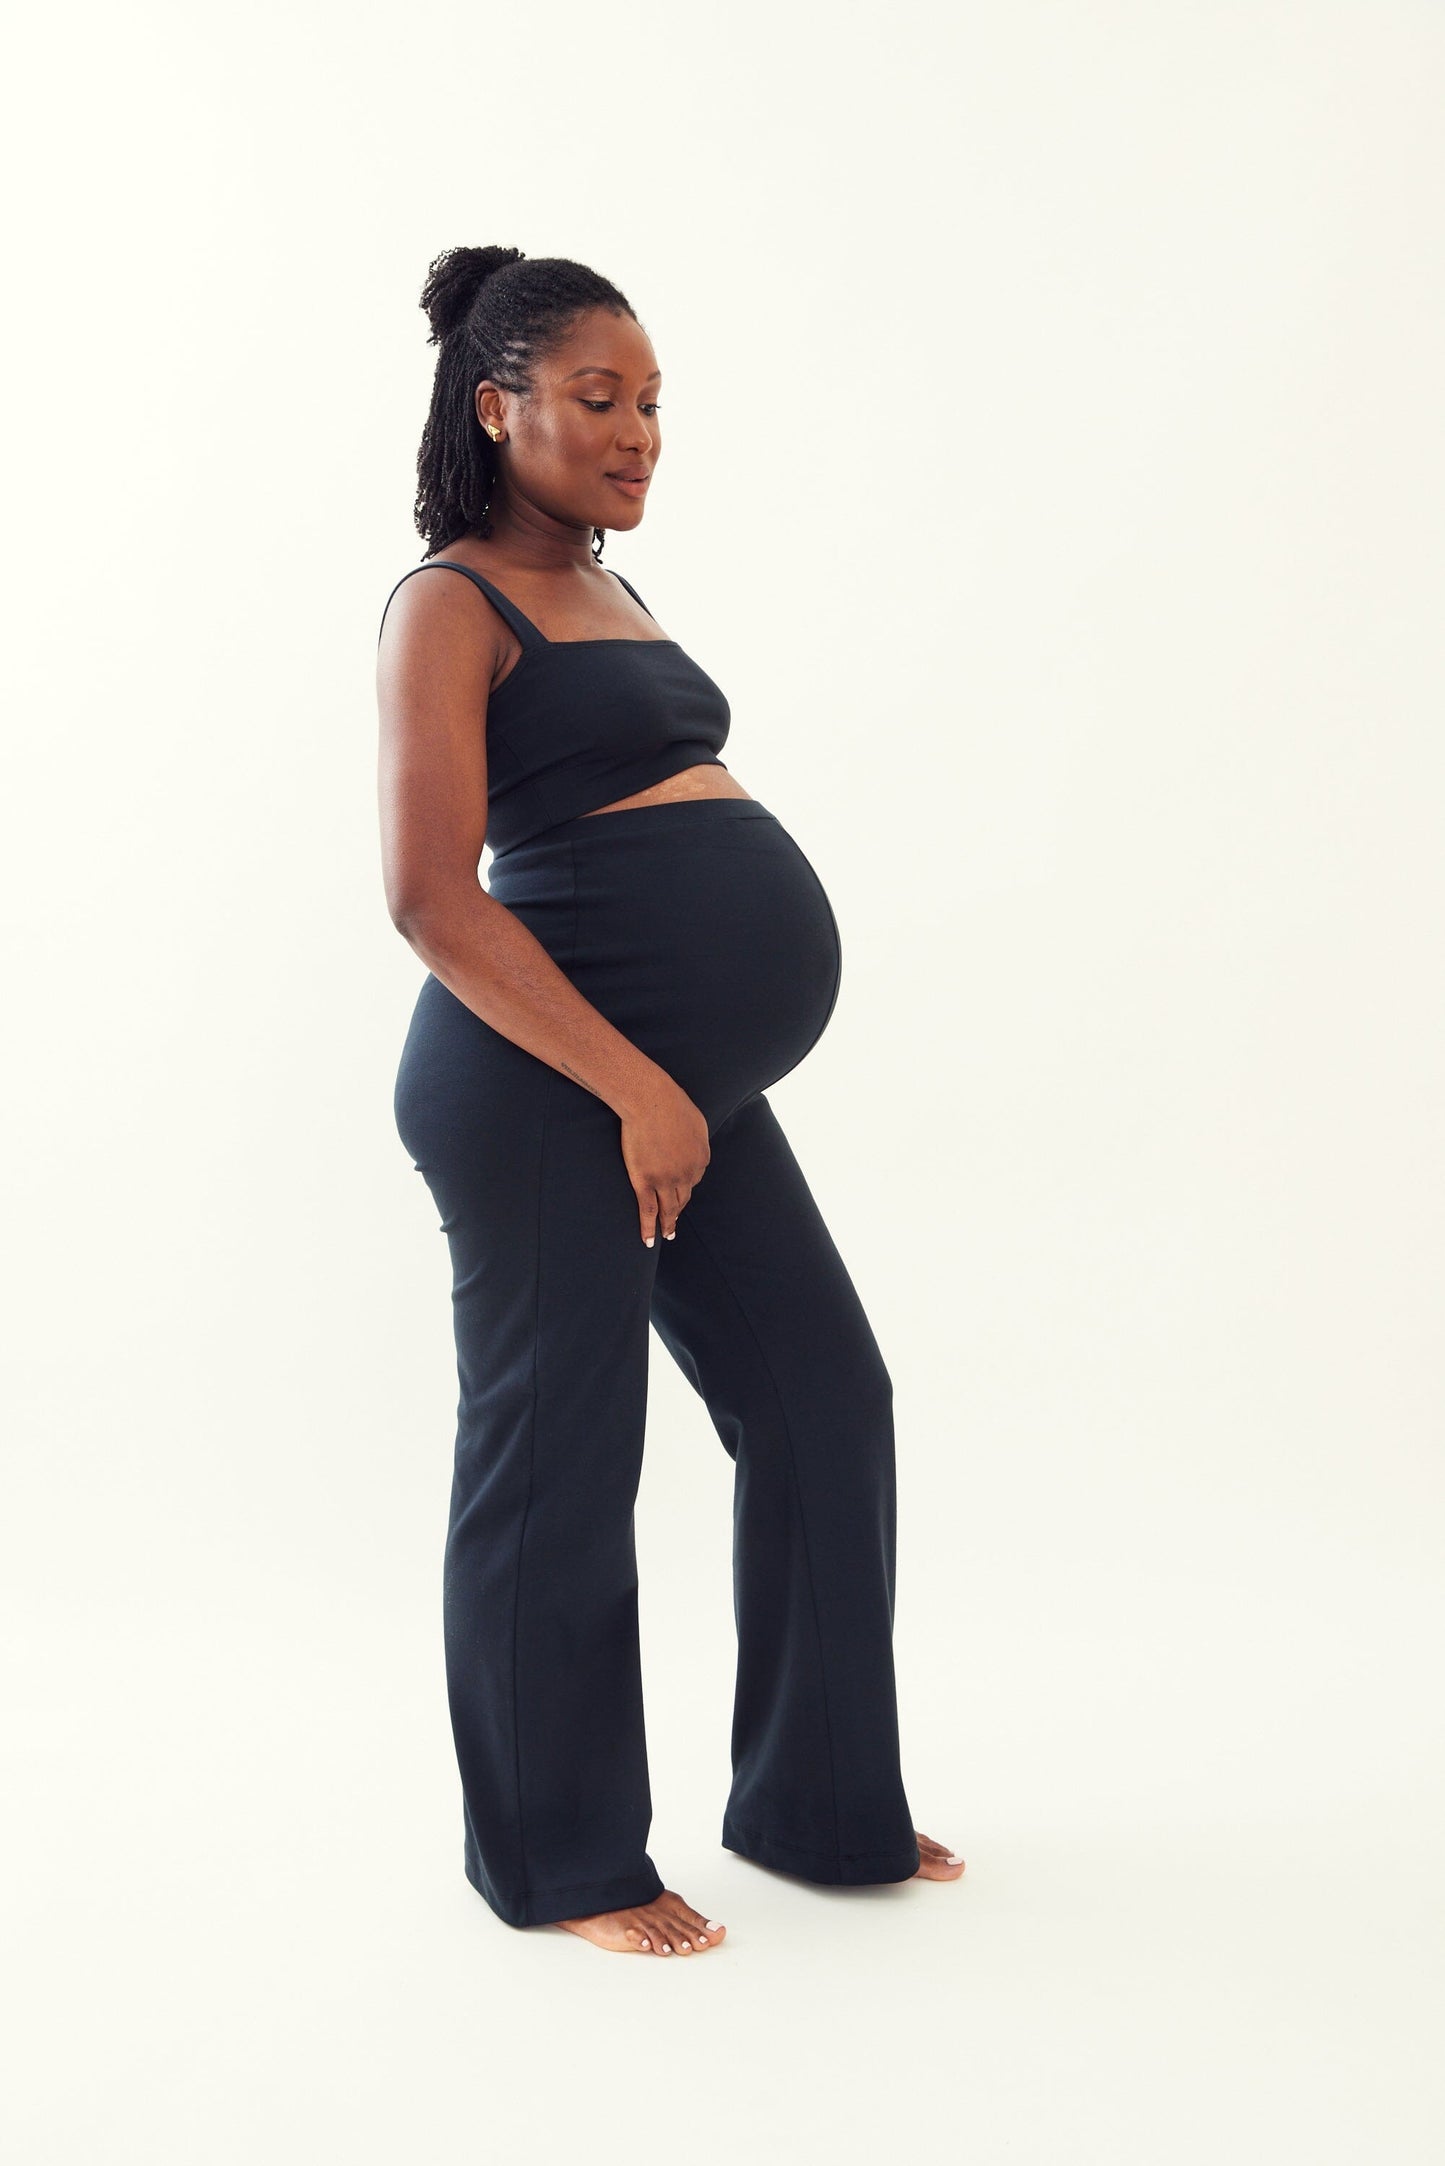 M Street Maternity's Zahra Over Belly Maternity Pant in Navy Black